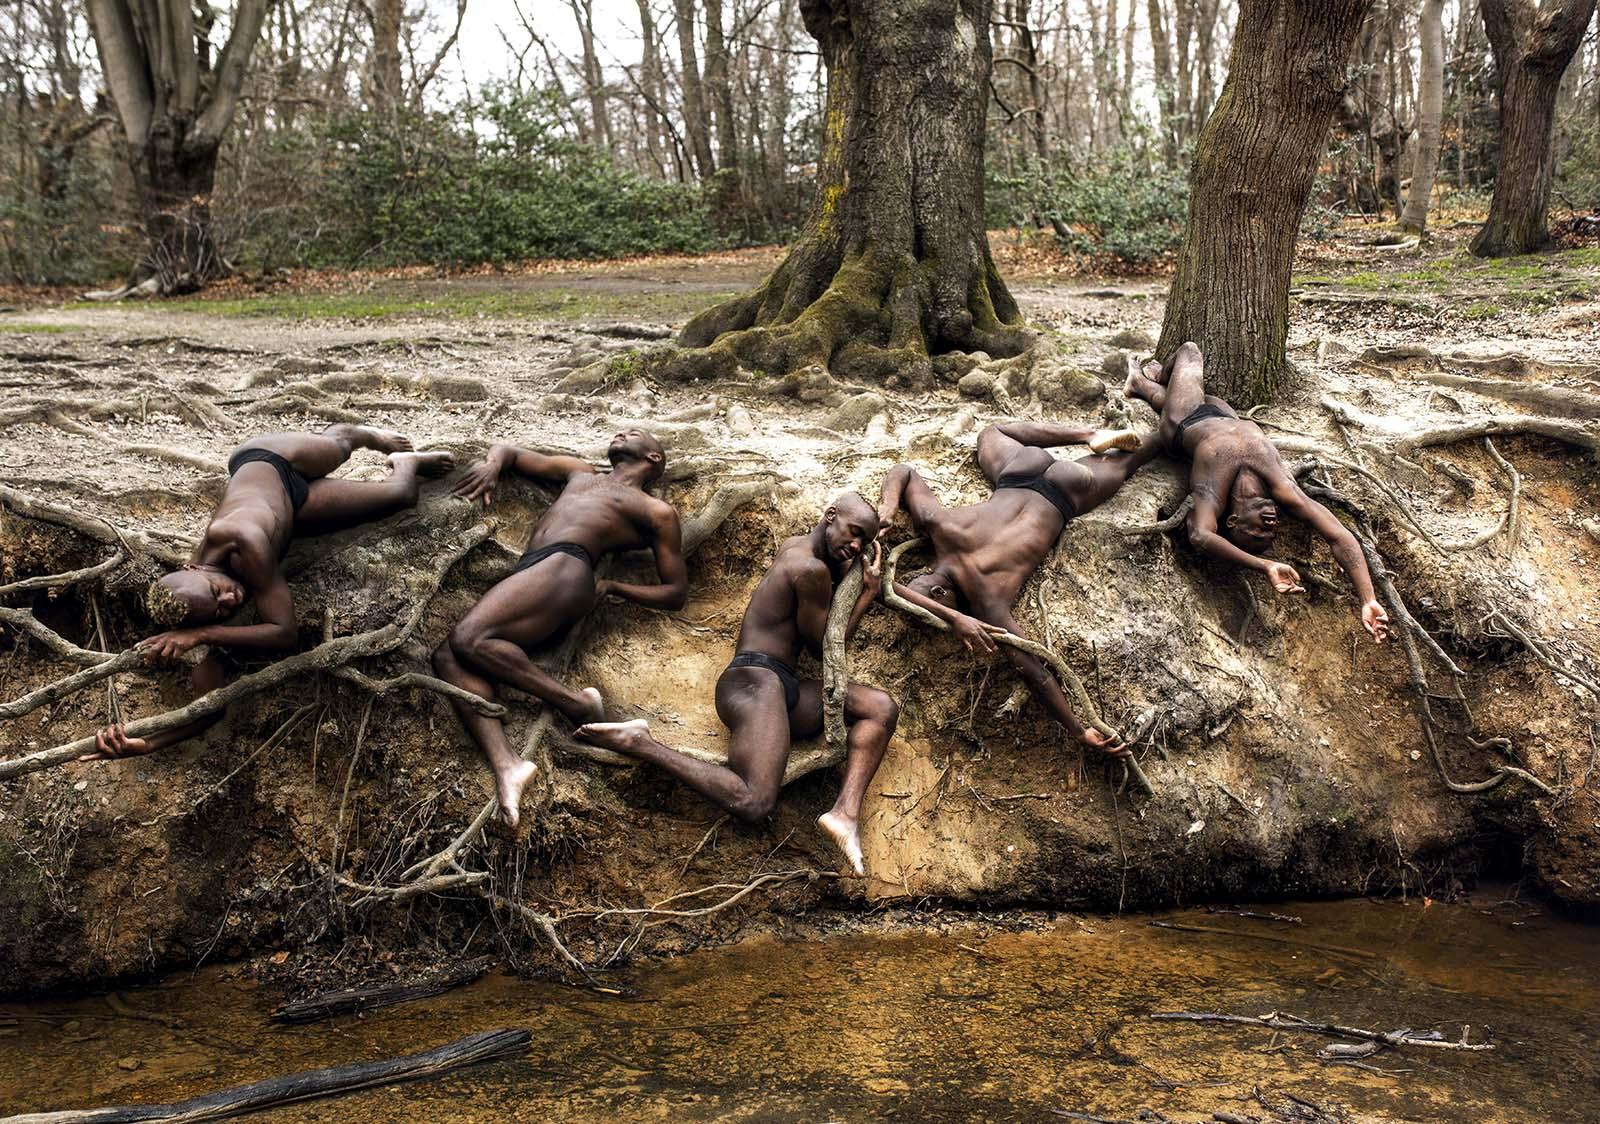 Omer Ga'ash Color Photograph - Roots I (the nude male body becomes part of the terrain - nude texture)